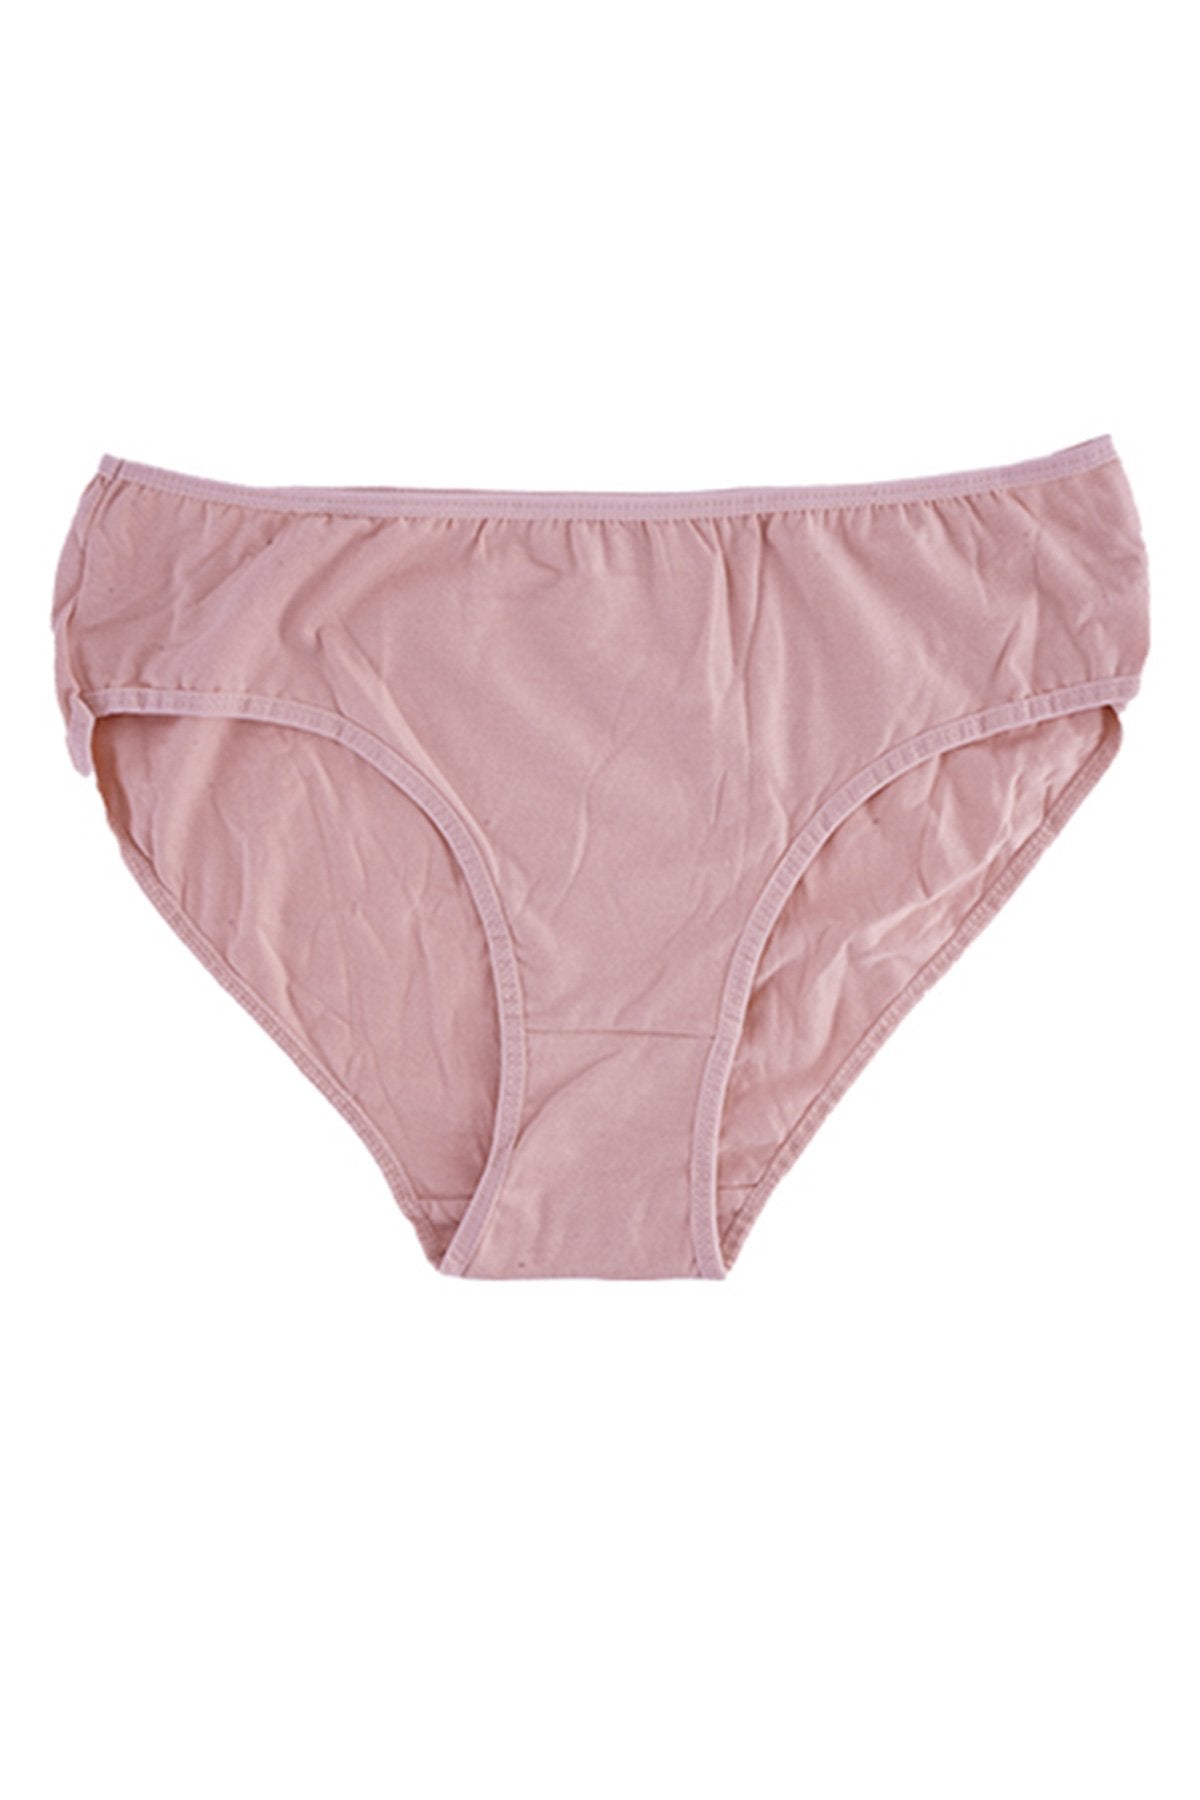 BLS - Pansy Cotton Panty - Beige